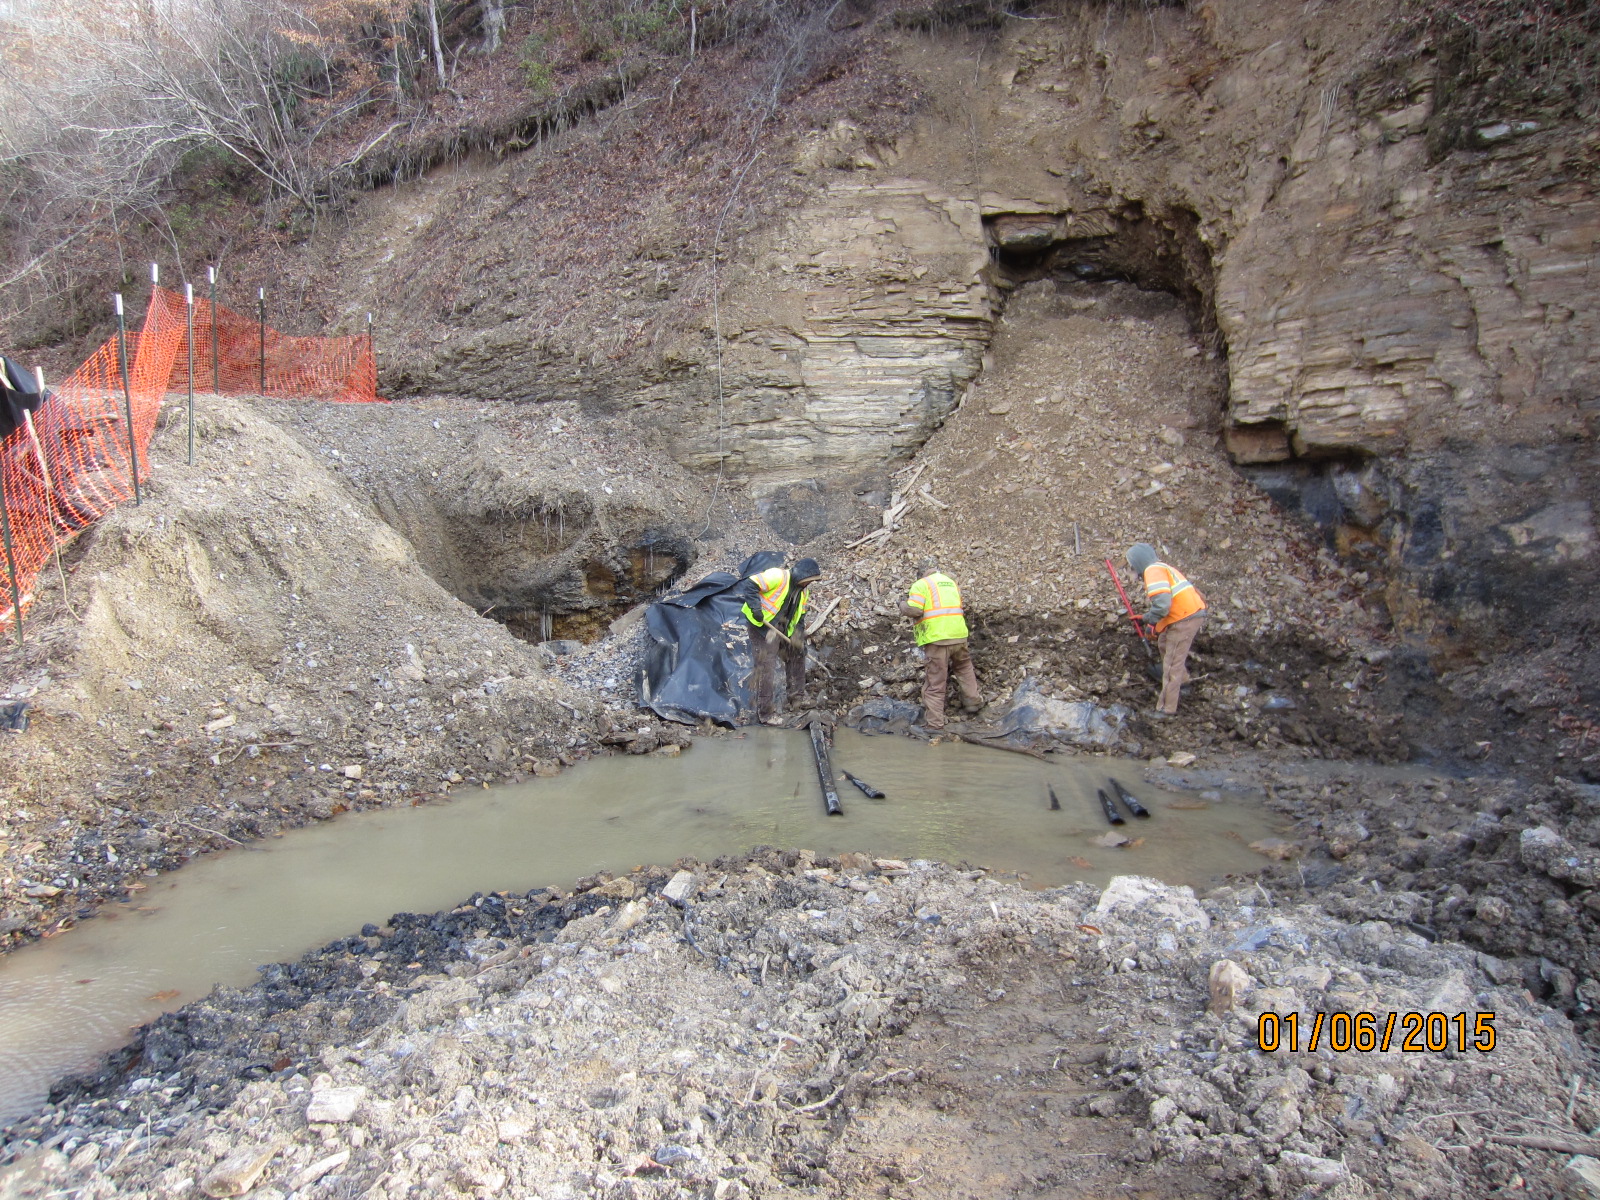 workers cleaning up mine site